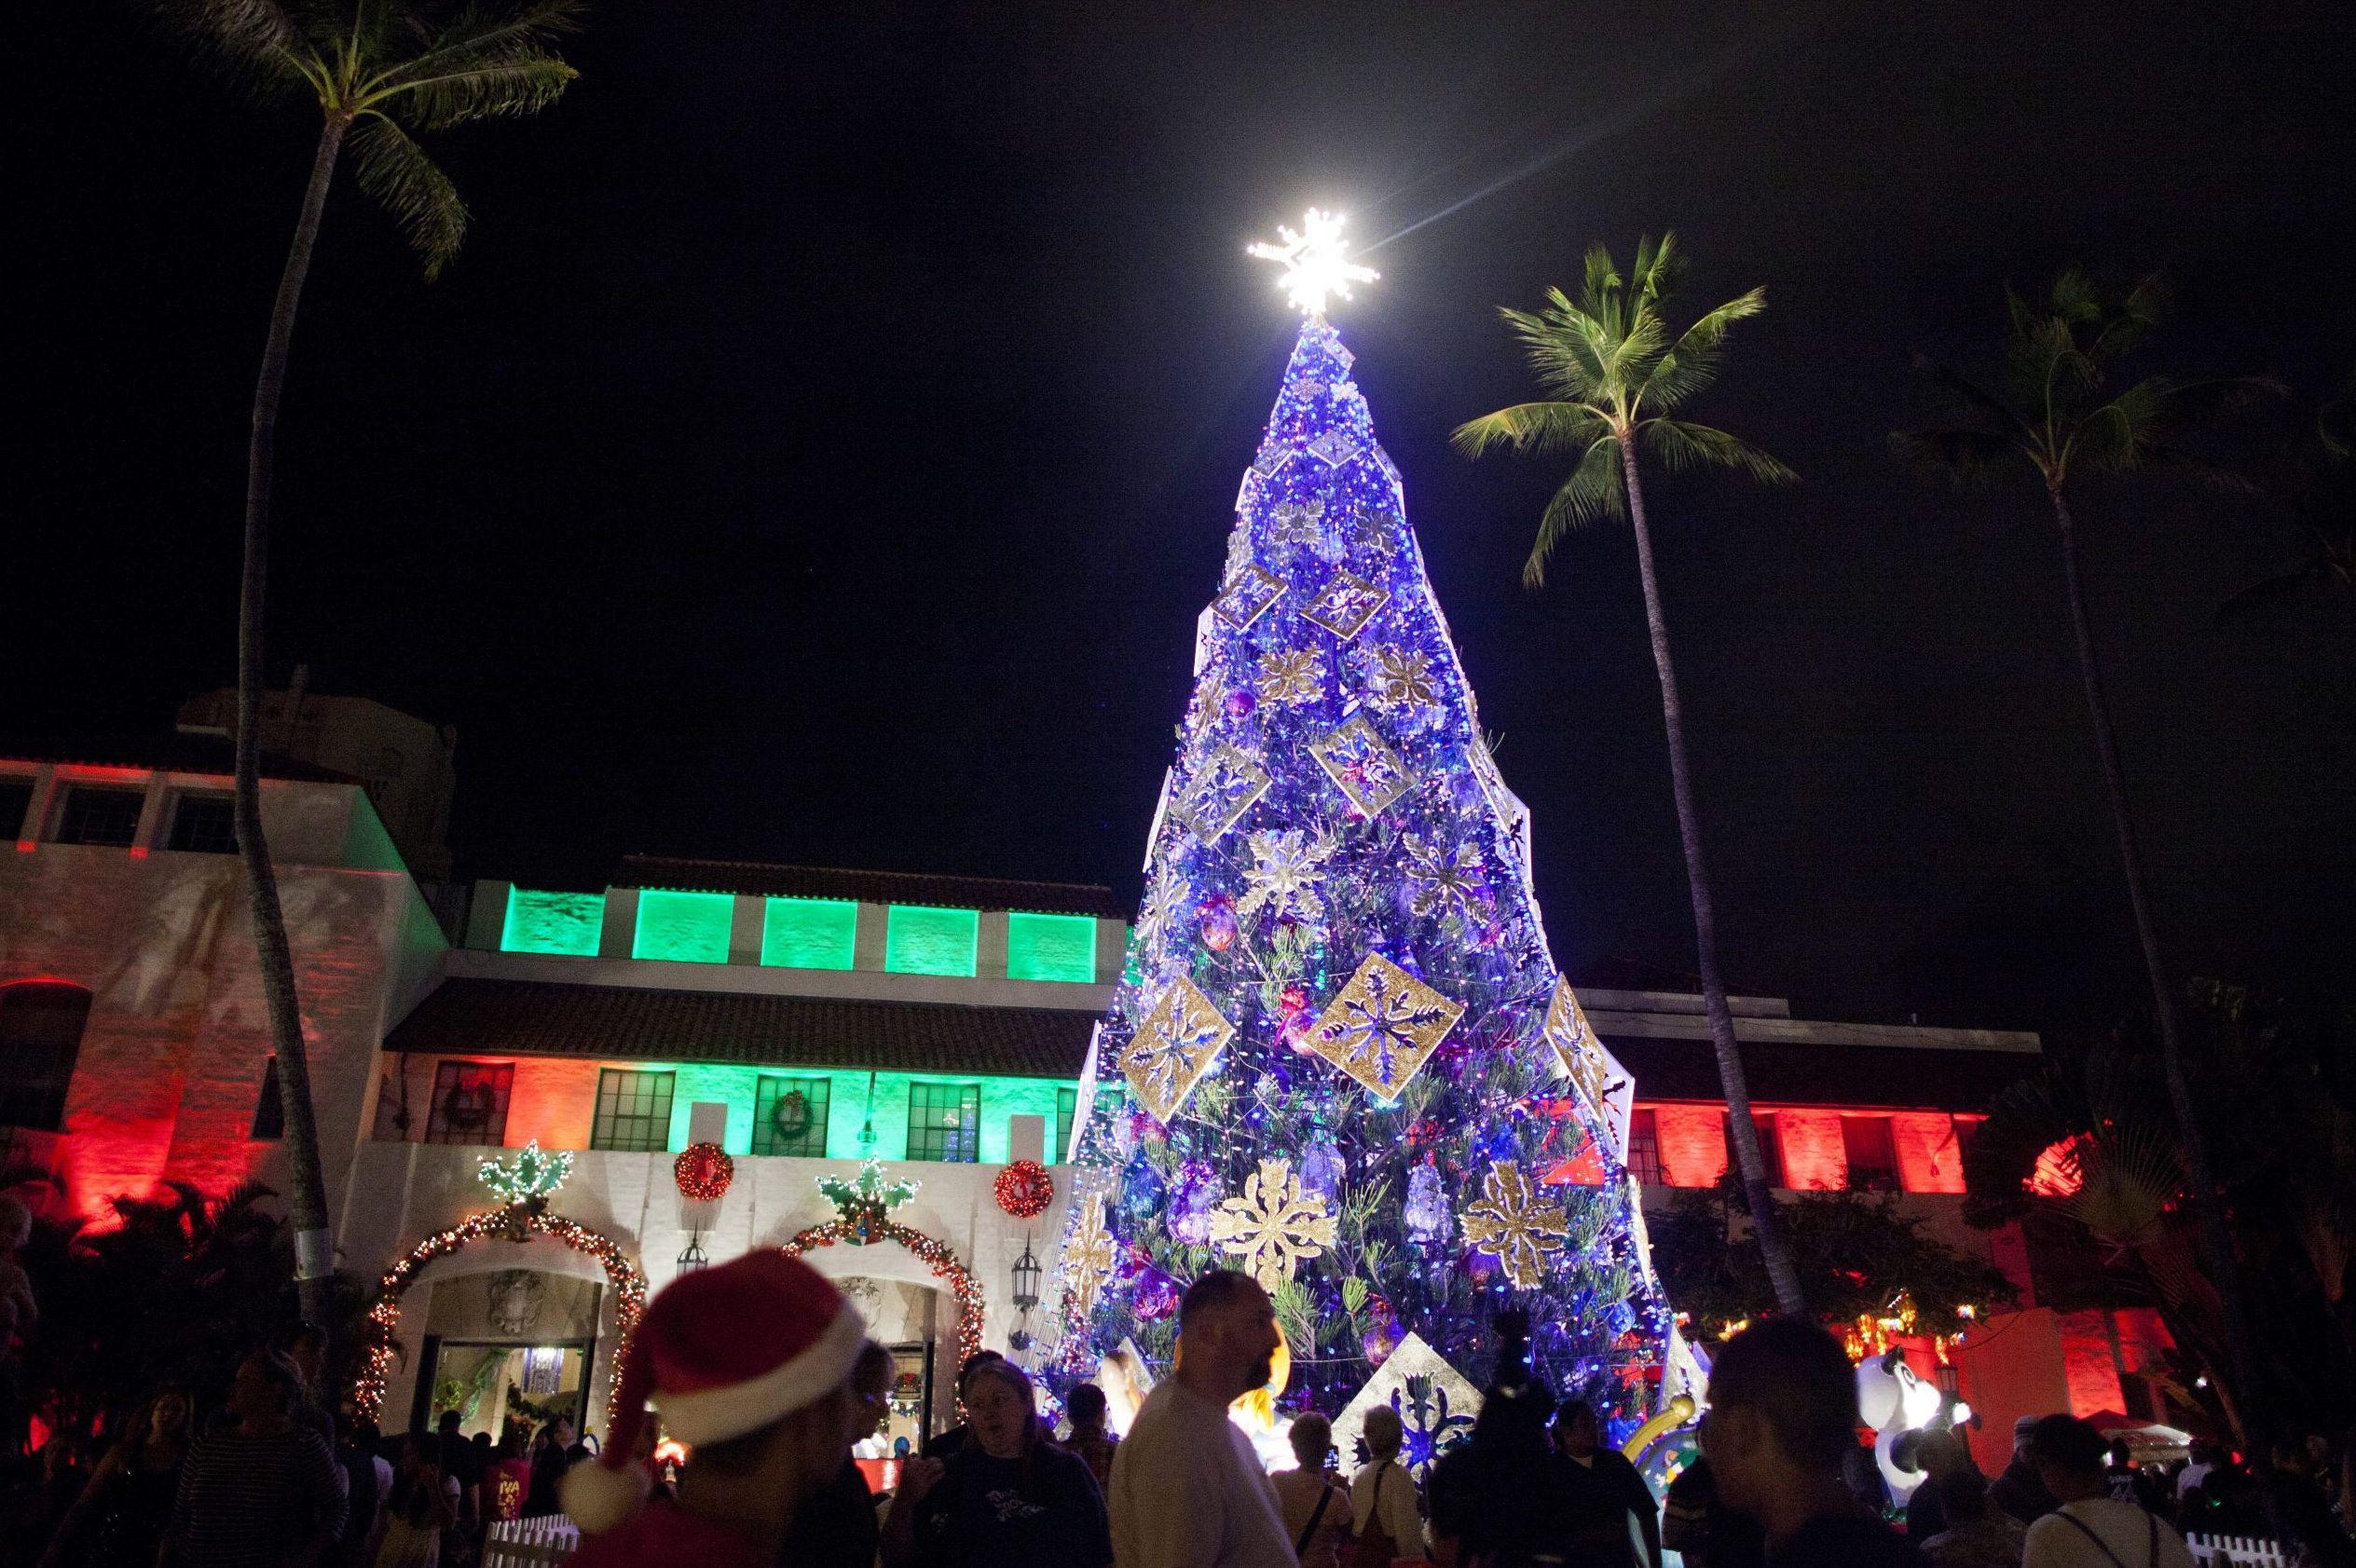 <p><strong>Best for:</strong> A warm-weather Christmas vacation</p> <p>Say "Mele Kalikimaka" ("Merry Christmas" in Hawaiian) as you combine your Christmas celebration with a tropical vacation in one of the <a href="https://www.rd.com/list/best-destinations-for-a-warm-christmas/">best destinations to visit for a warm Christmas</a>. Honor the heroes of Pearl Harbor while celebrating Hawaiian culture during the Waikiki Holiday Parade. Also not to be missed: Honolulu City Lights, illuminations and displays outside Honolulu Hale (City Hall) that include the 21-foot Shaka Santa and Tutu Mele (Mrs. Claus) statues, who dip their giant toes in the fountain.</p> <p>Base your stay in Honolulu to experience all the Hawaiian capital has to offer for the holidays. The beautifully decorated historic <a href="https://www.tripadvisor.com/Hotel_Review-g60982-d87095-Reviews-Queen_Kapiolani_Hotel-Honolulu_Oahu_Hawaii.html" rel="noopener">Queen Kapiolani Hotel</a> is just a block from Waikiki Beach, with an affordable price tag and amazing views.</p> <p class="listicle-page__cta-button-shop"><a class="shop-btn" href="https://www.tripadvisor.com/Hotel_Review-g60982-d87095-Reviews-Queen_Kapiolani_Hotel-Honolulu_Oahu_Hawaii.html">Book Now</a></p>